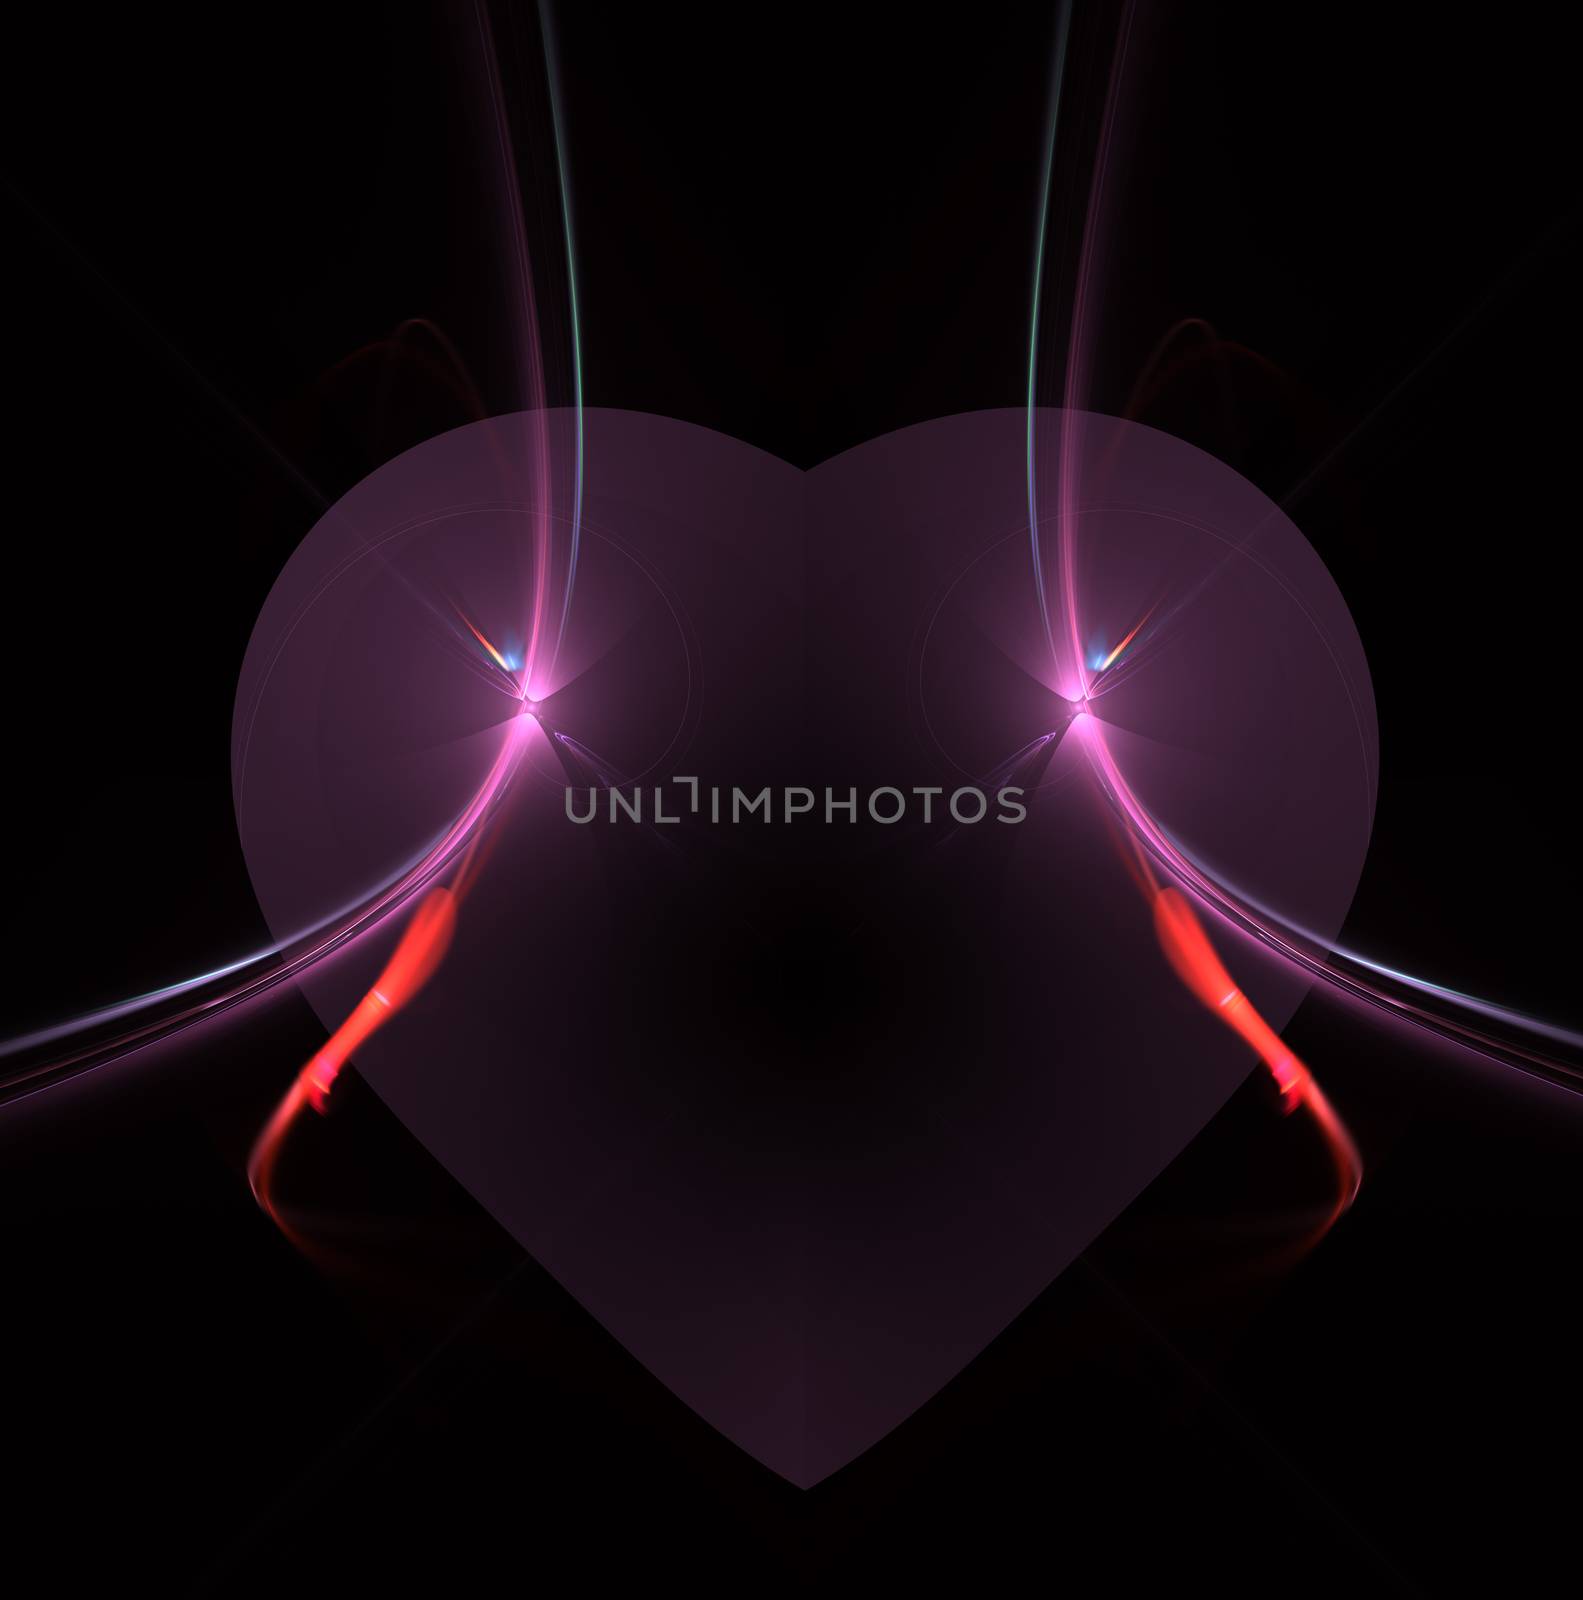 Burning and beating heart. Valentine's day background. An abstract computer generated modern fractal design on dark background. Abstract fractal color texture. Digital art. Abstract Form & Colors. Abstract fractal element pattern for your design